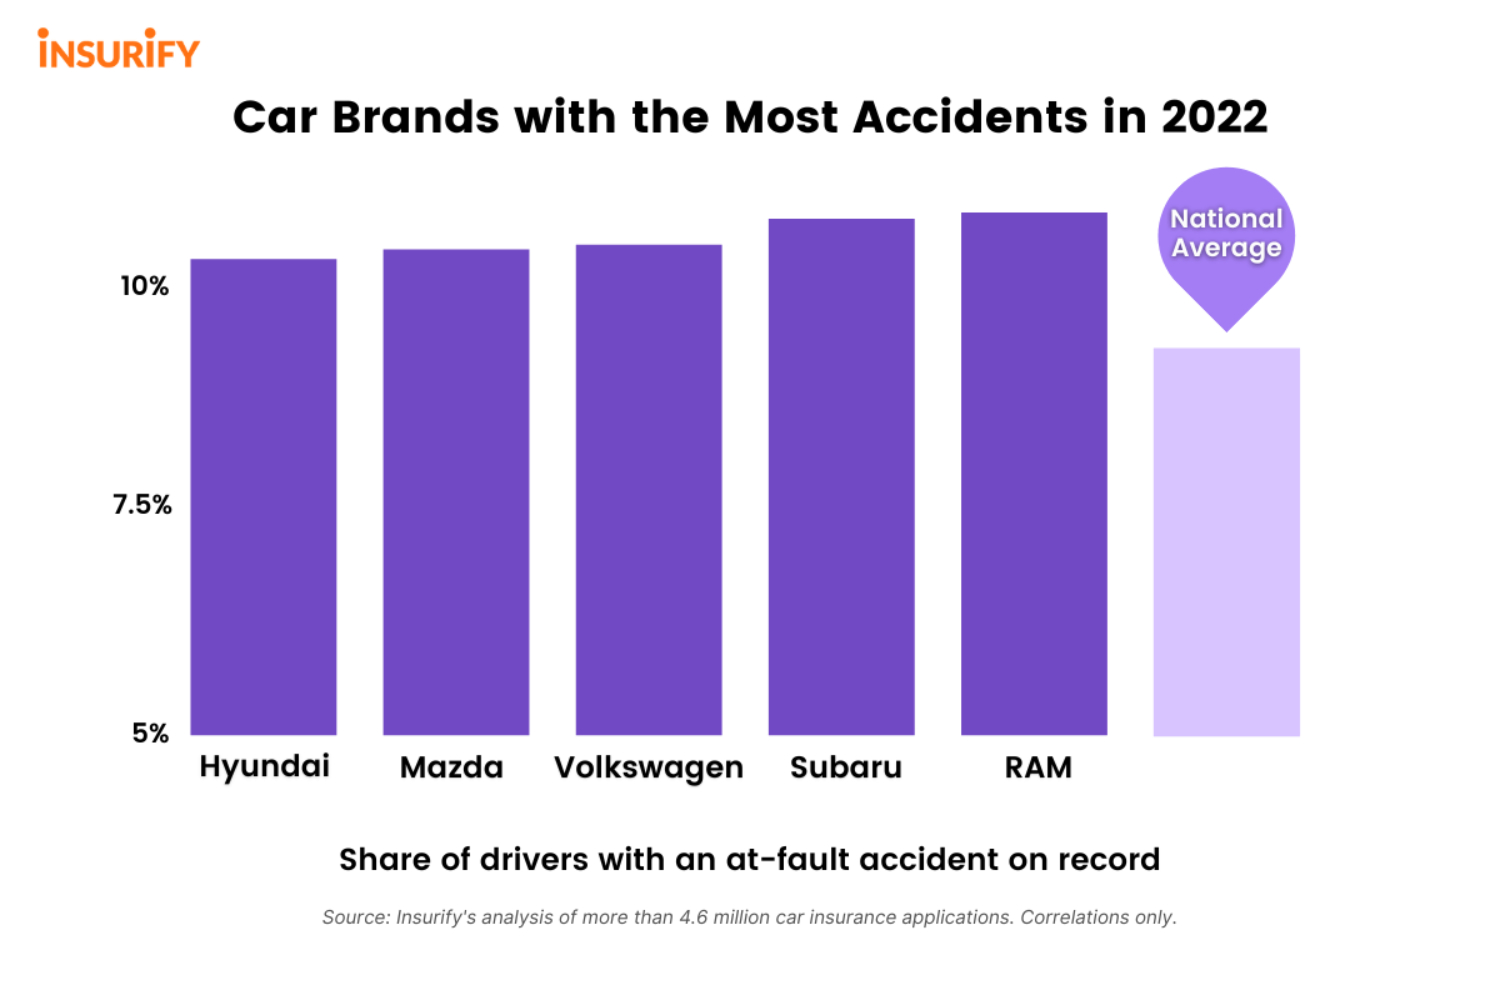 Car brands with the most accidents